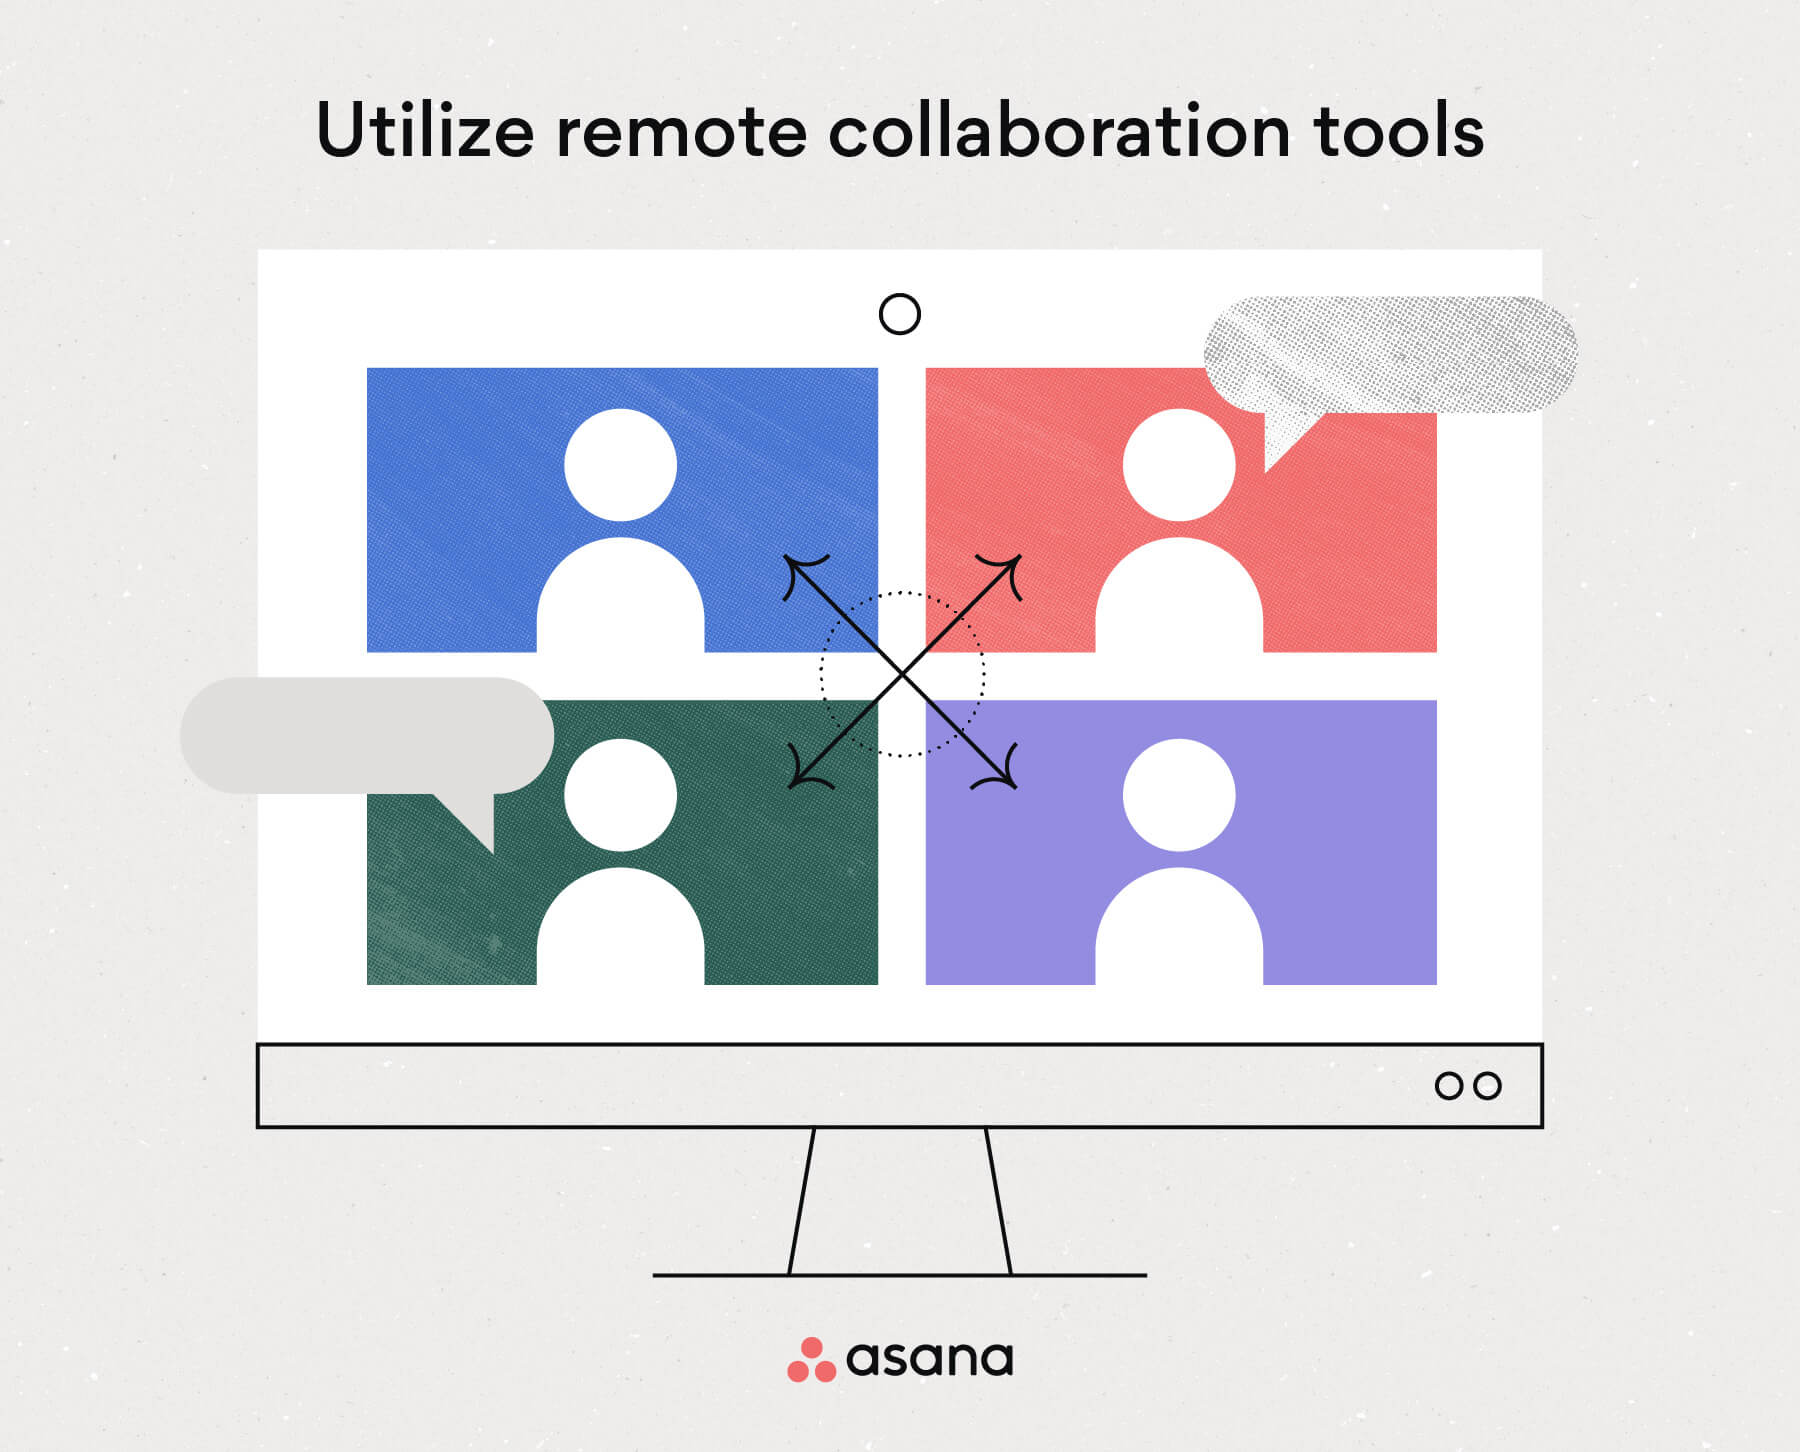 [inline illustration] Utilize remote collaboration tools (abstract)